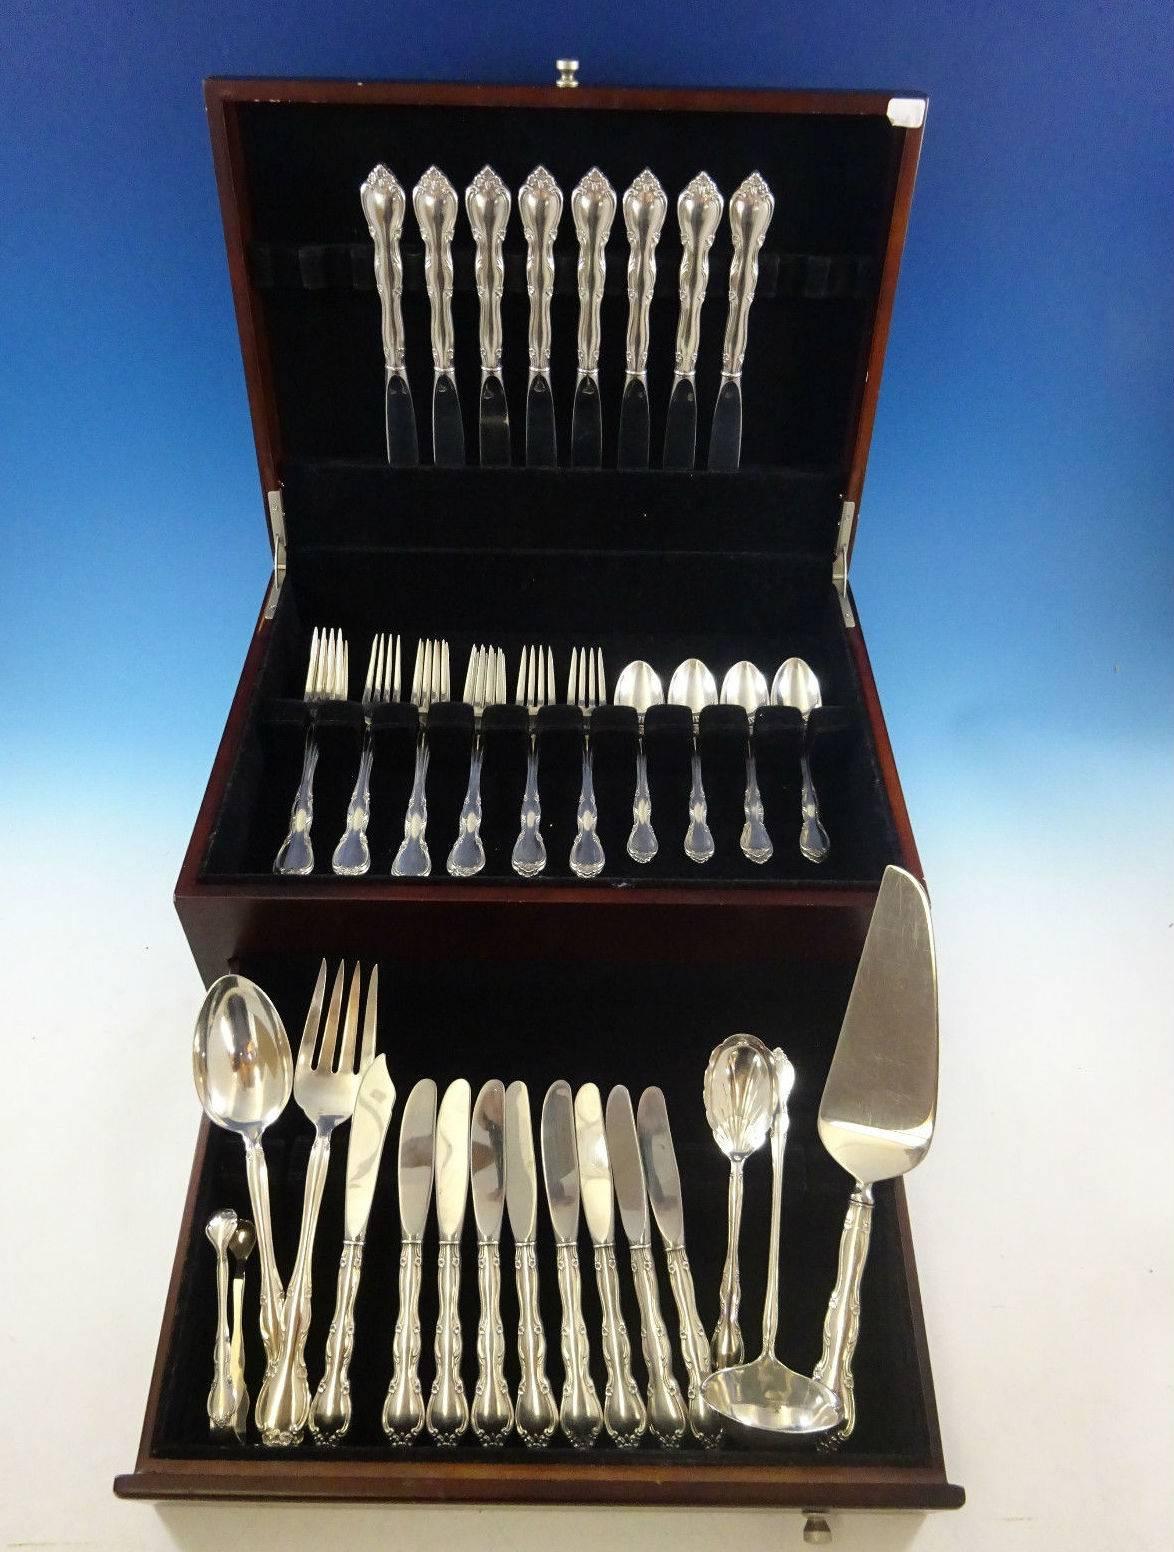 Rose Tiara by Gorham sterling silver flatware set of 47 pieces. This set includes: 

Eight knives, 9